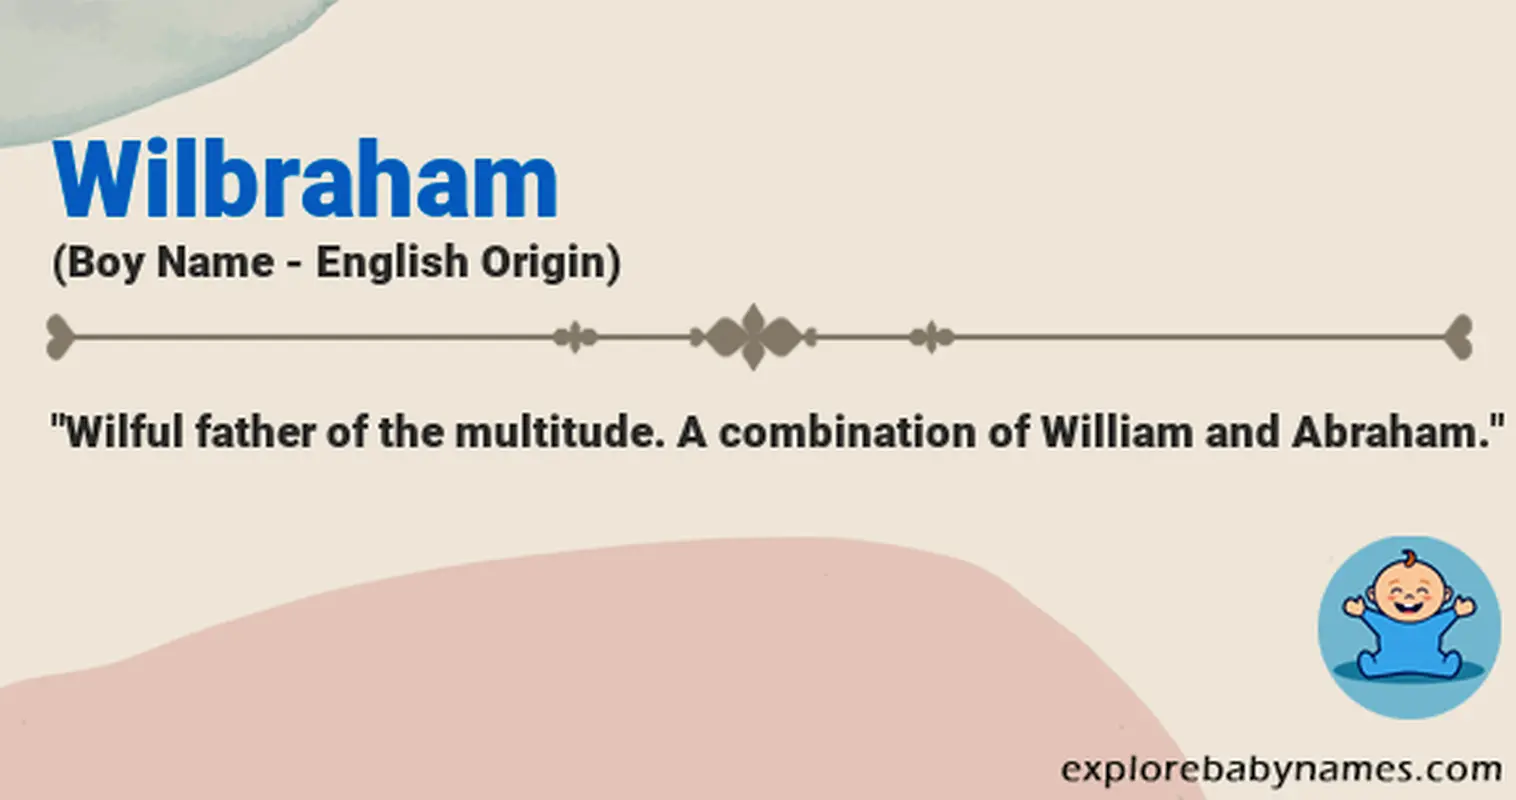 Meaning of Wilbraham